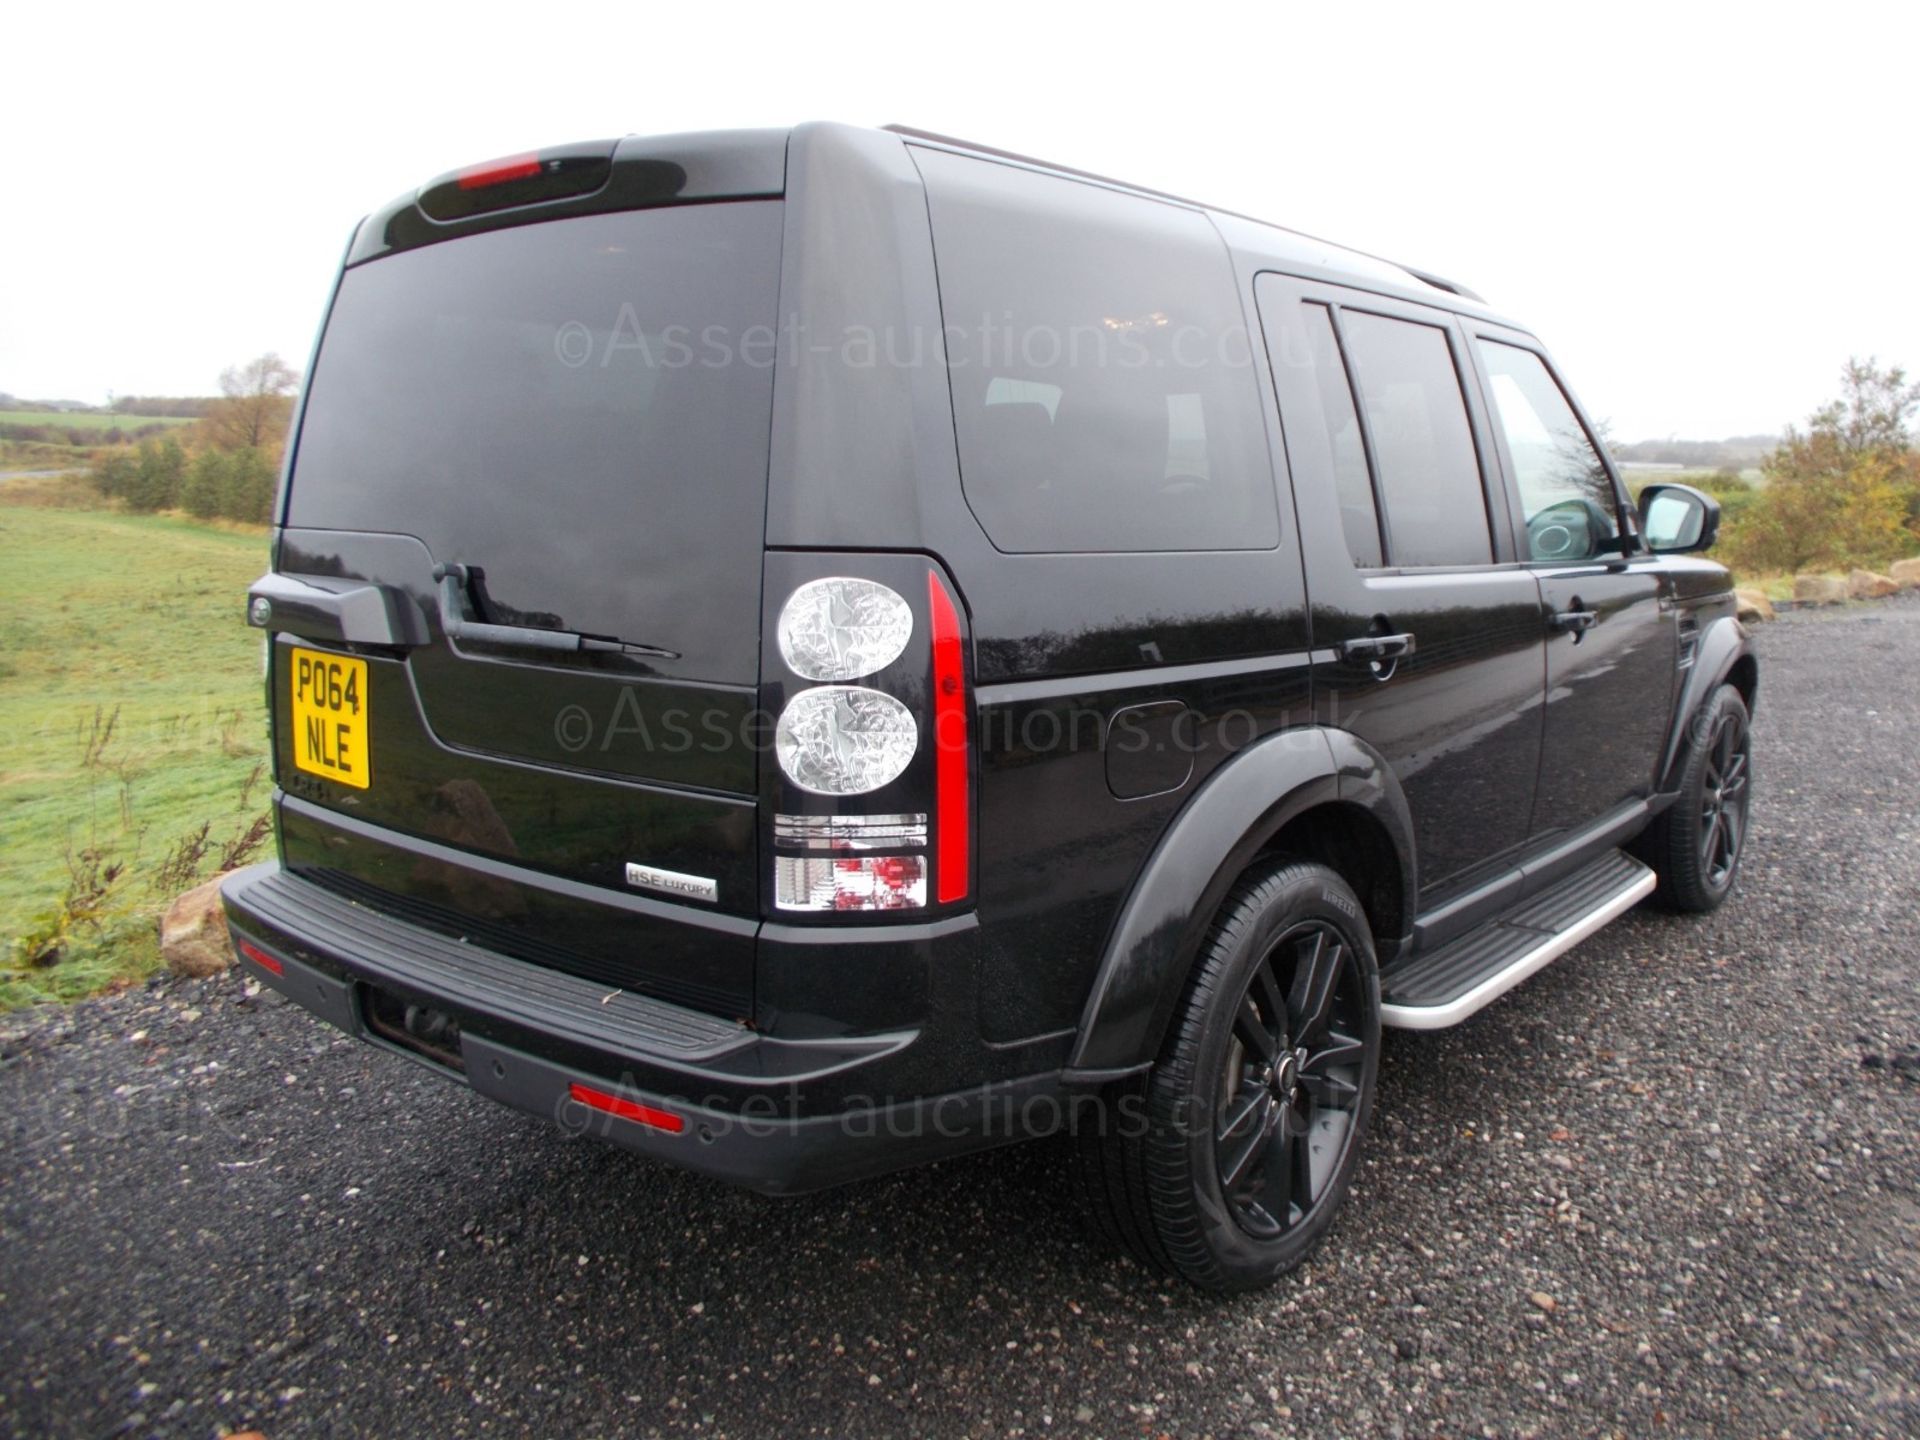 2015/64 LAND ROVER DISCOVERY HSE LUXURY SCV6 7 SEATER, 3.0 V6 PETROL SUPERCHARGED *PLUS VAT* - Image 7 of 27